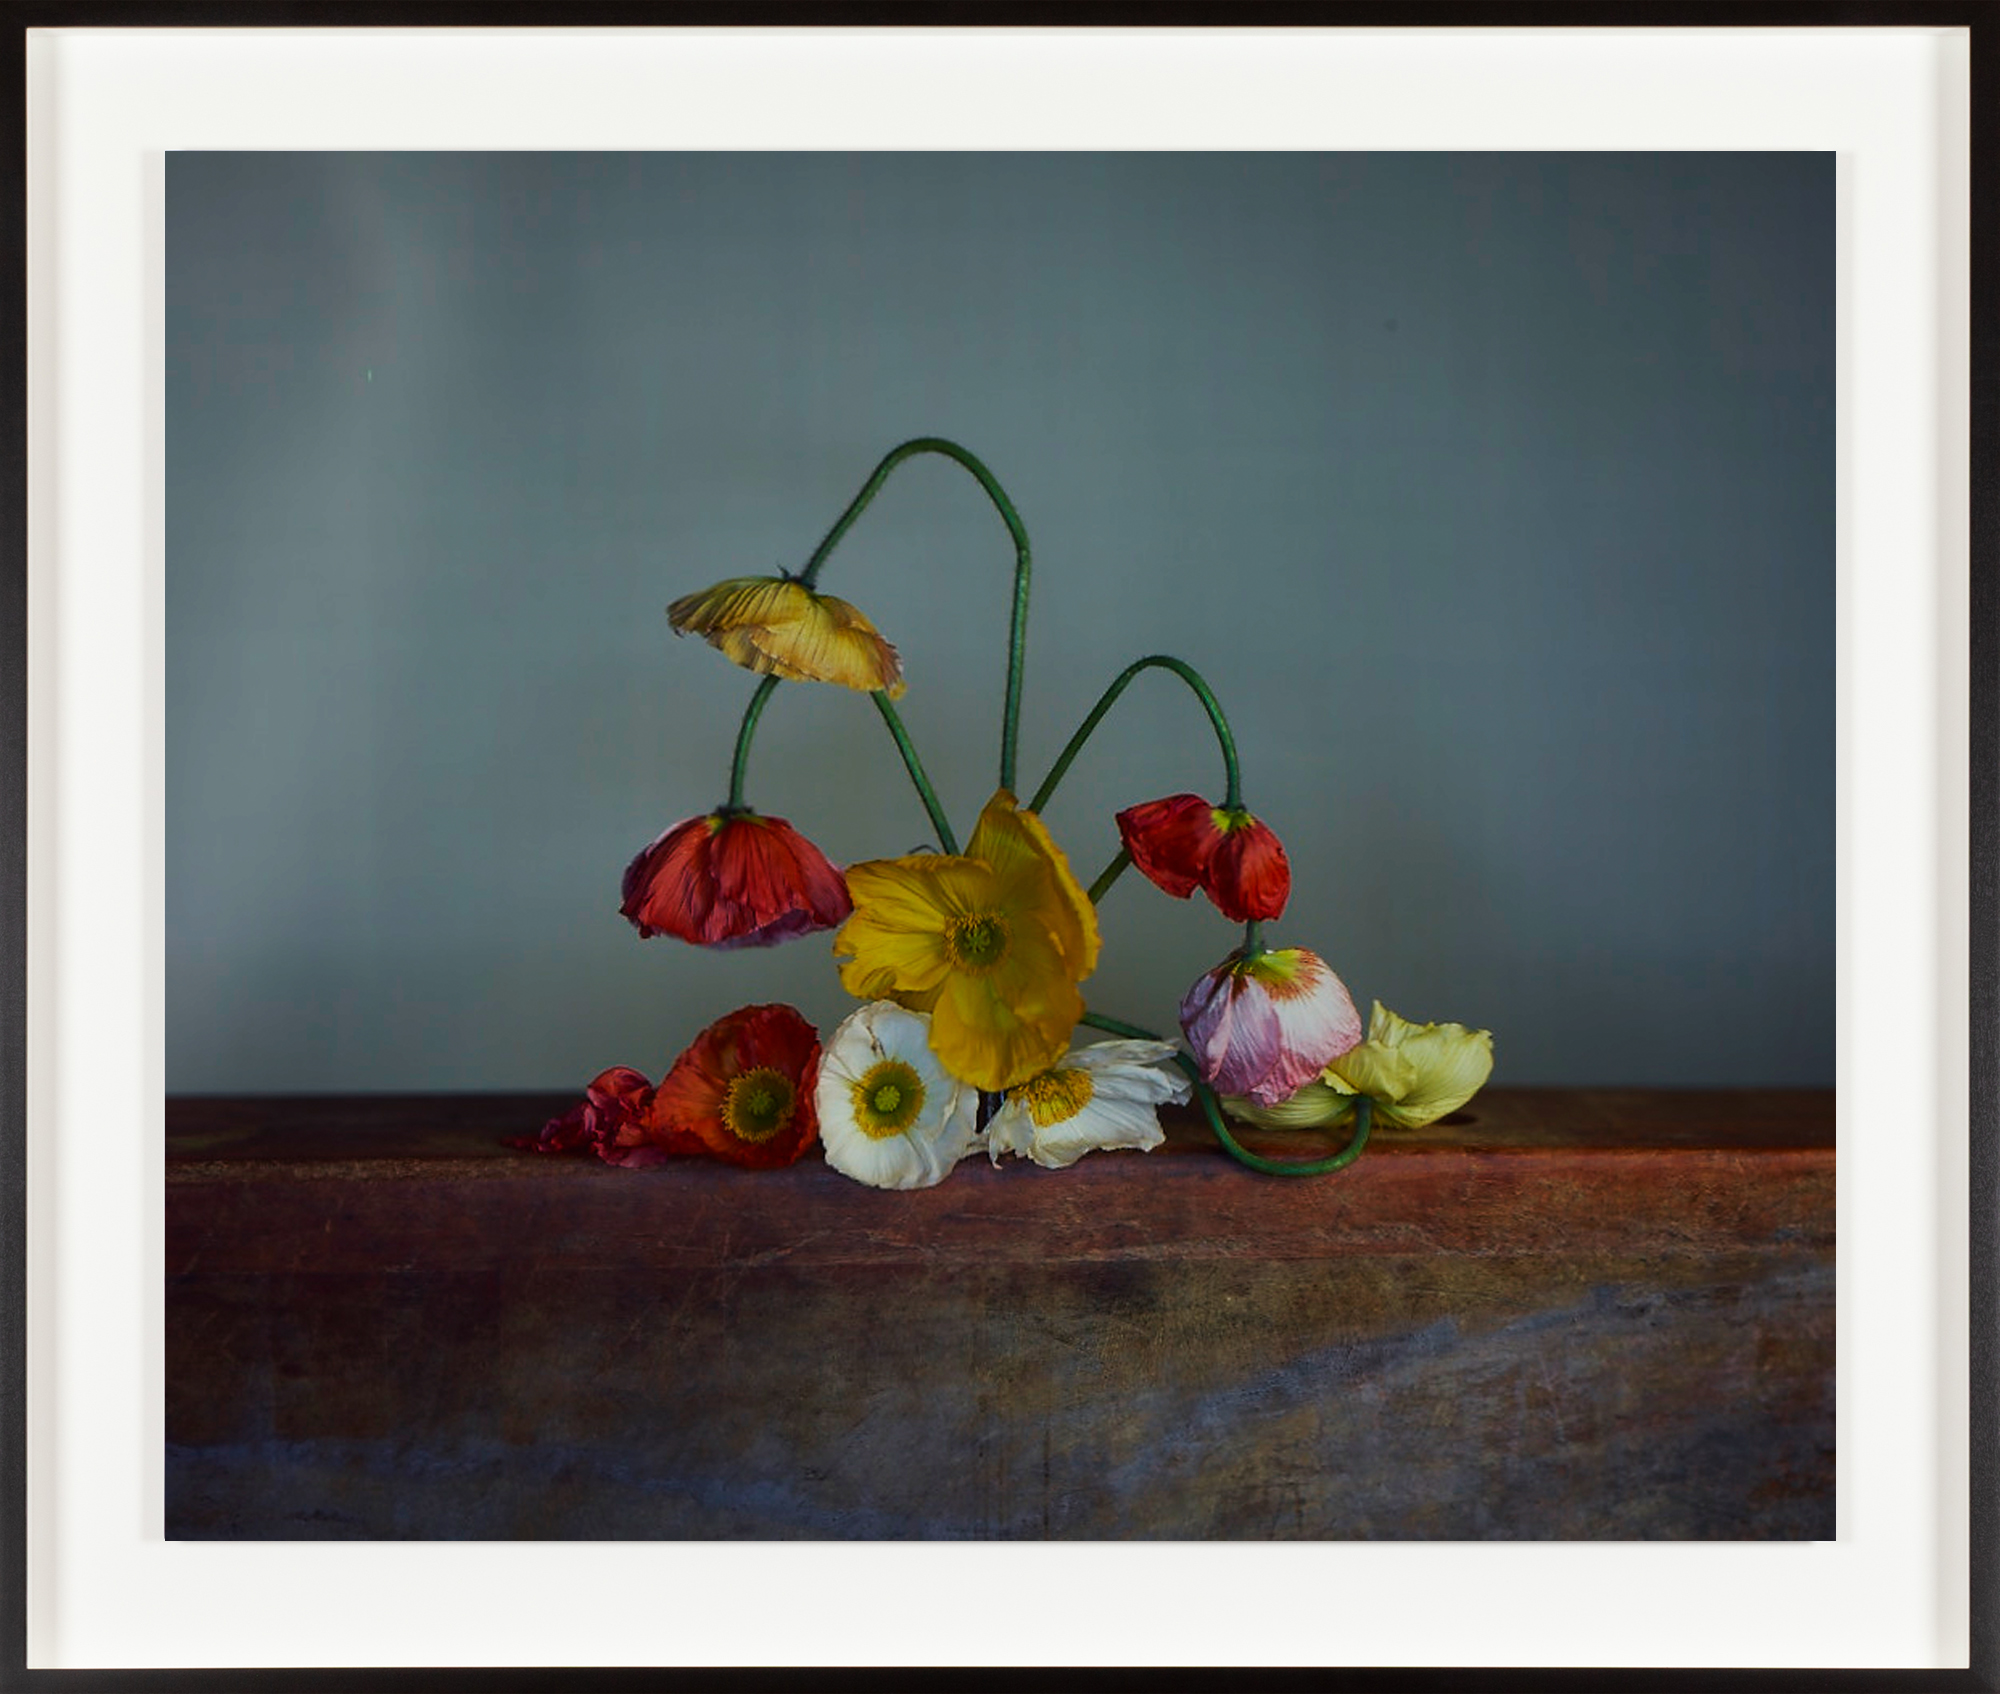 Framed, color photograph of a bouquet of colorful poppy flowers